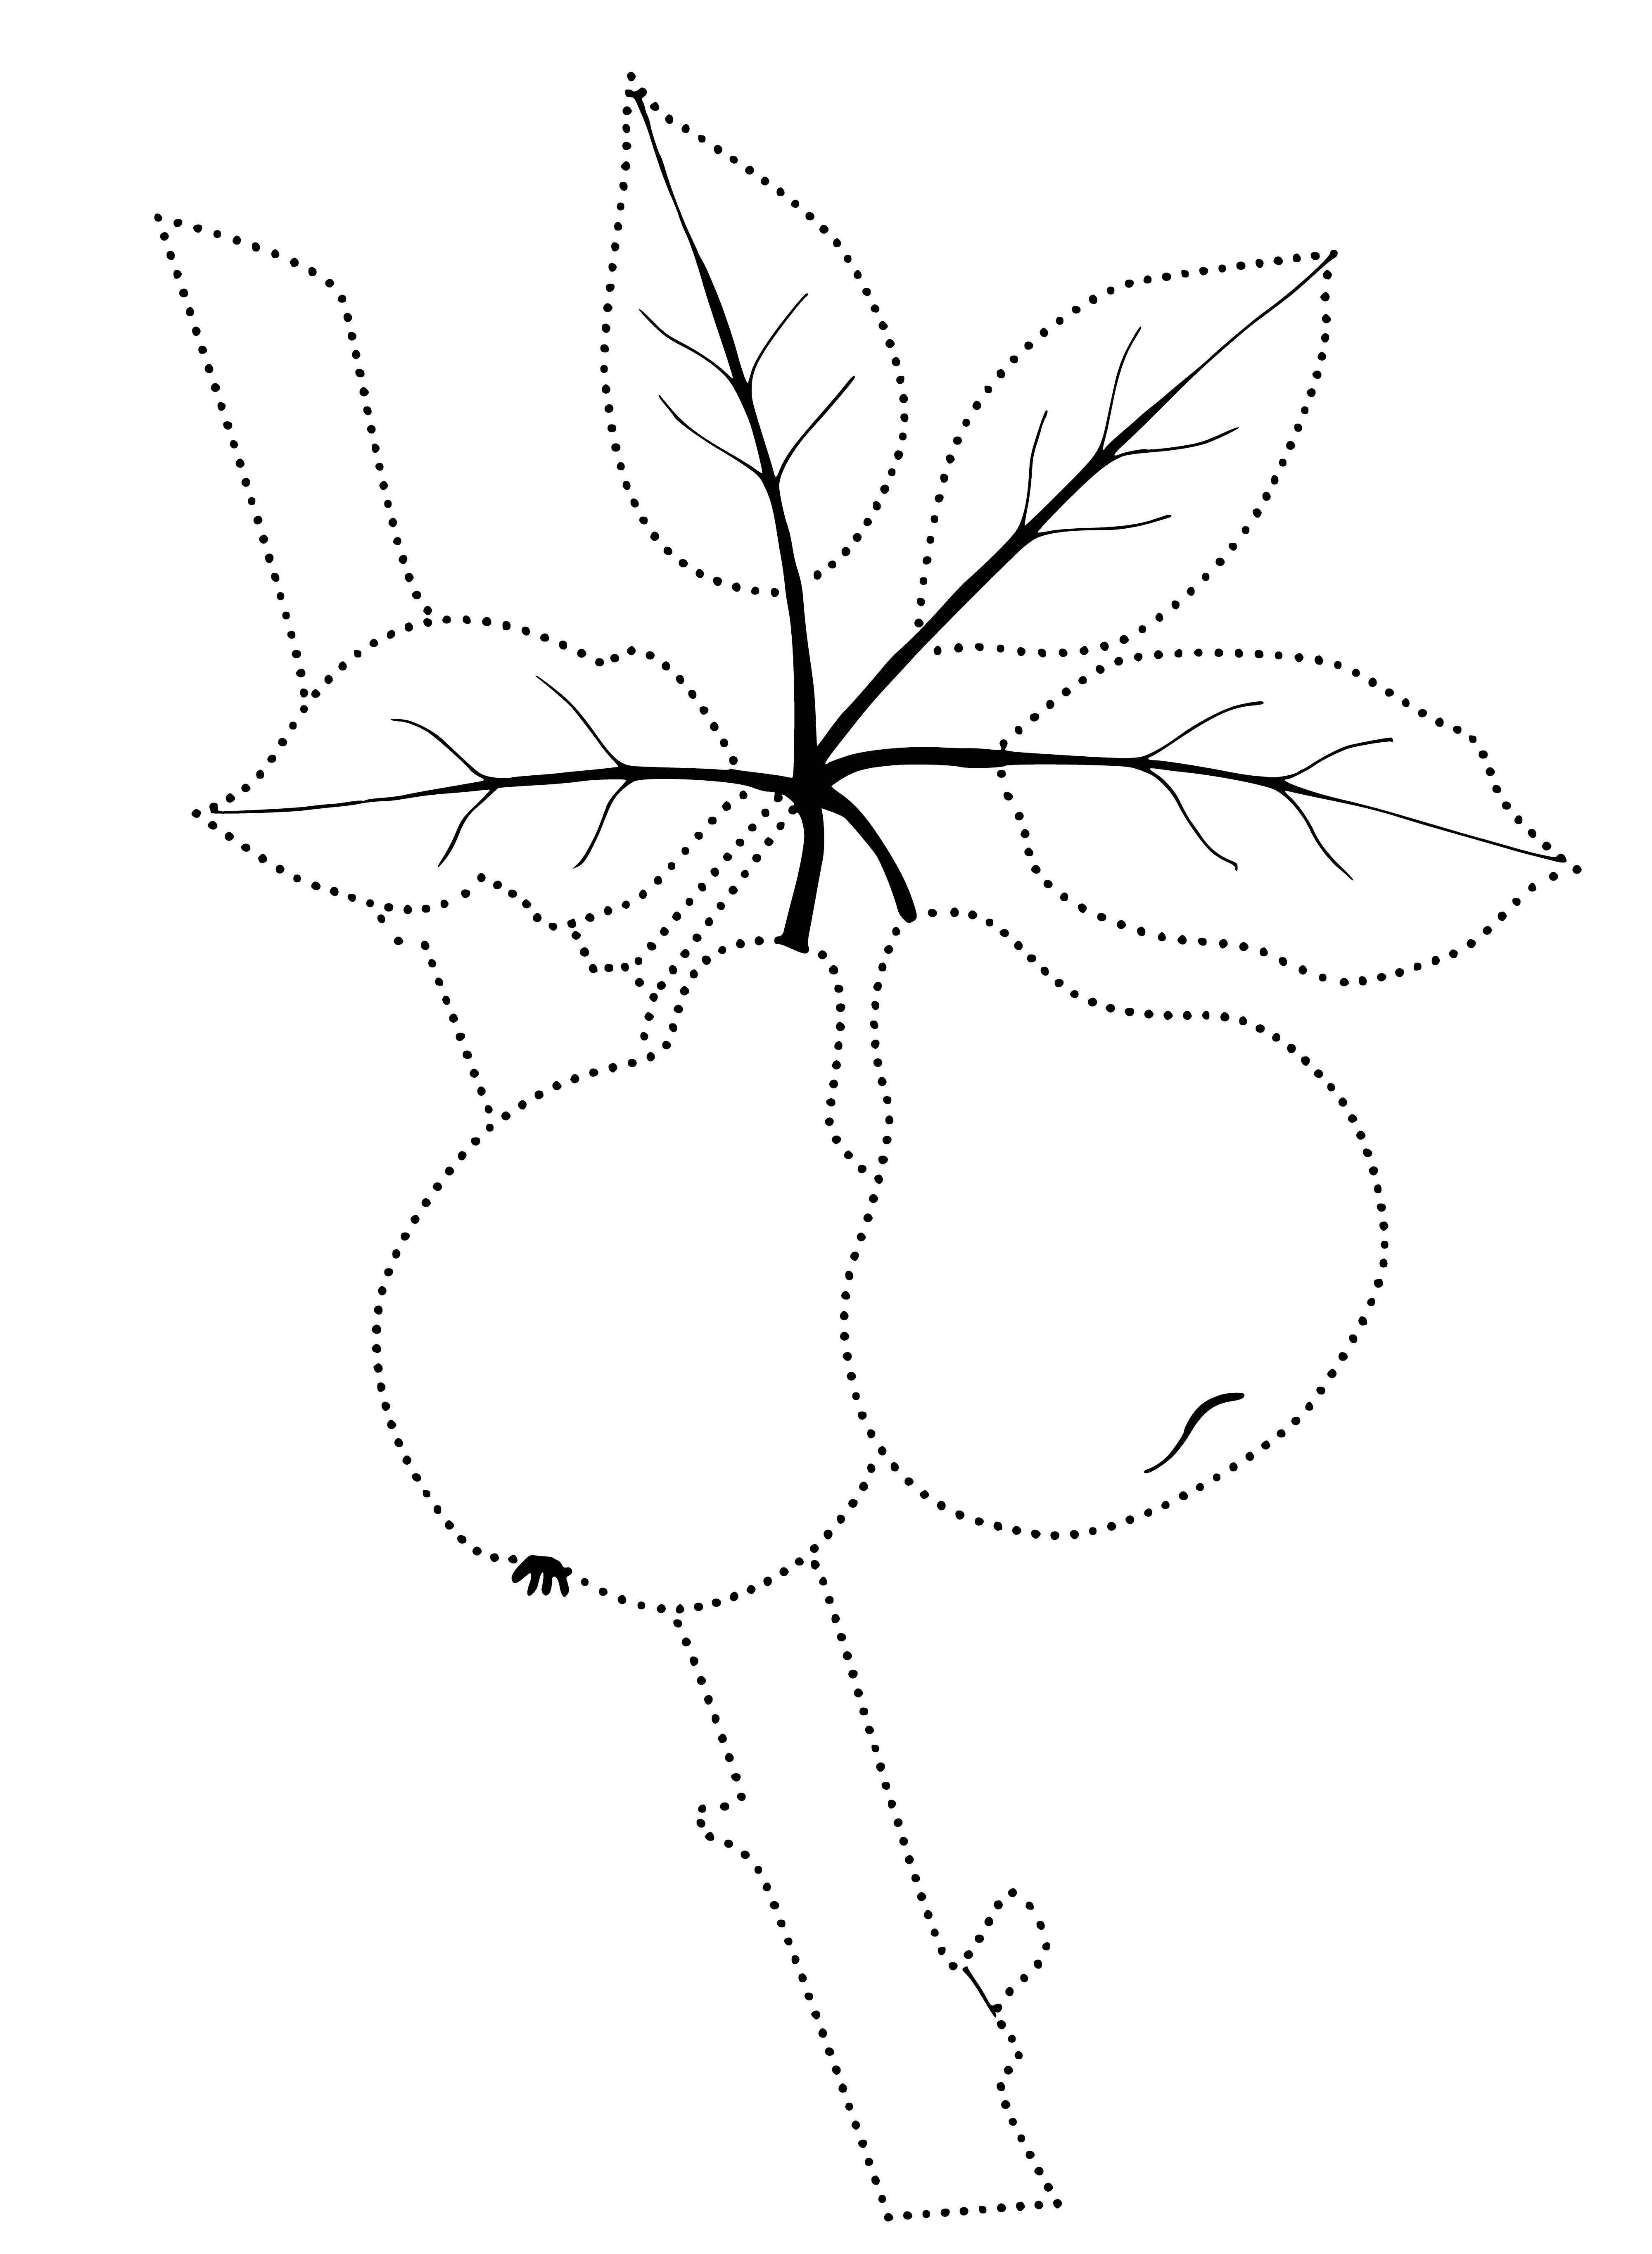 coloring page: 3 pears on the plate - 2 green, 1 yellow - all have leaves.